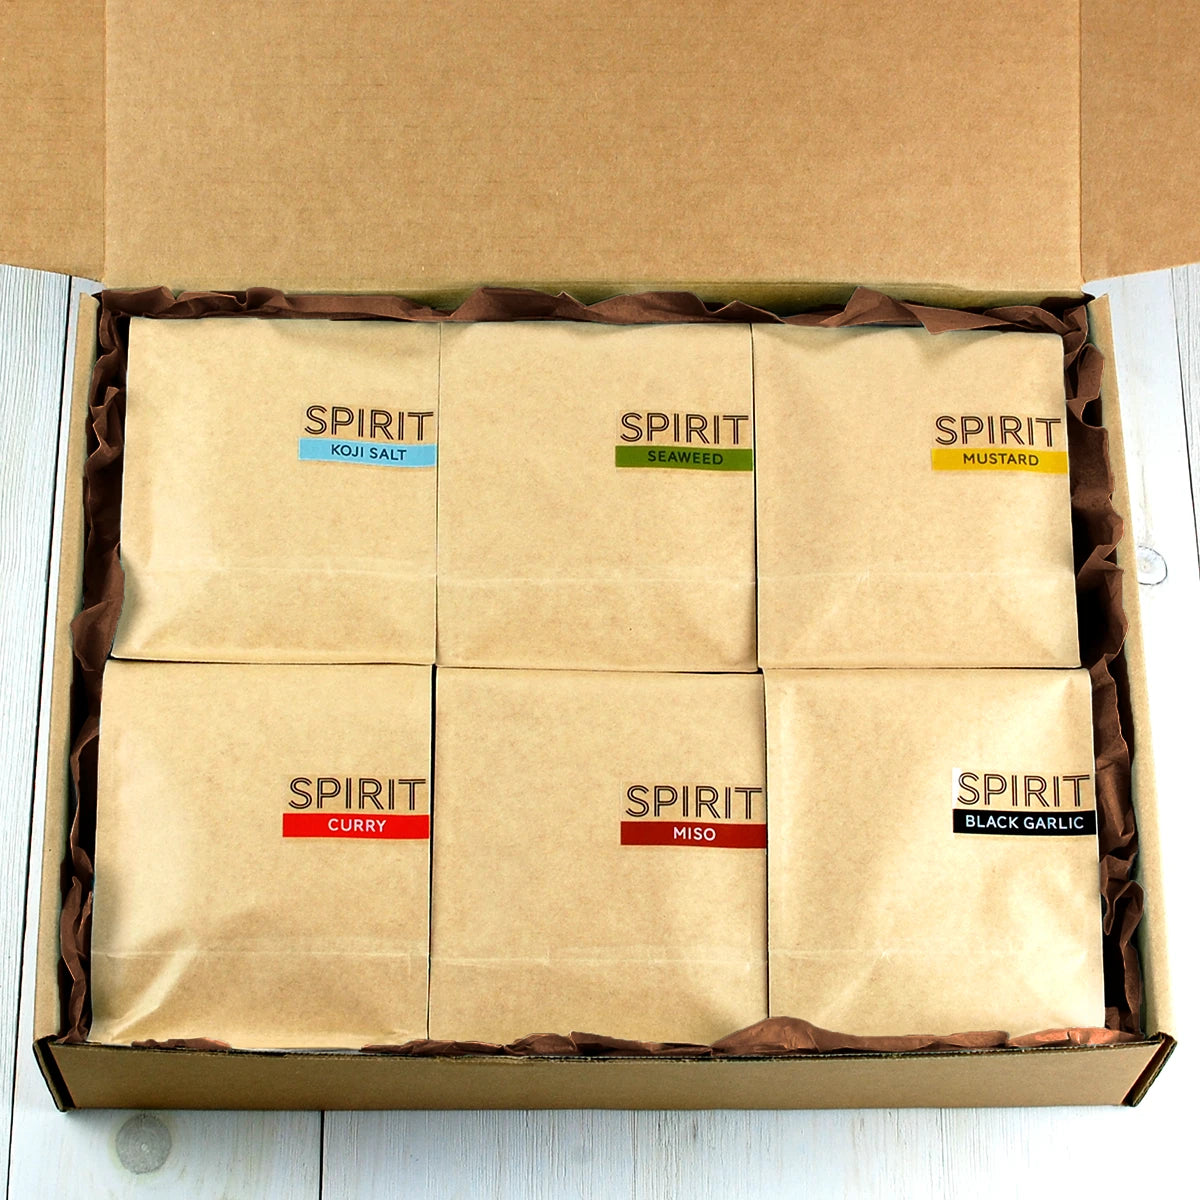 SPIRIT Almond MEGA Pack with six pouches as seen inside gift box with brown tissue paper